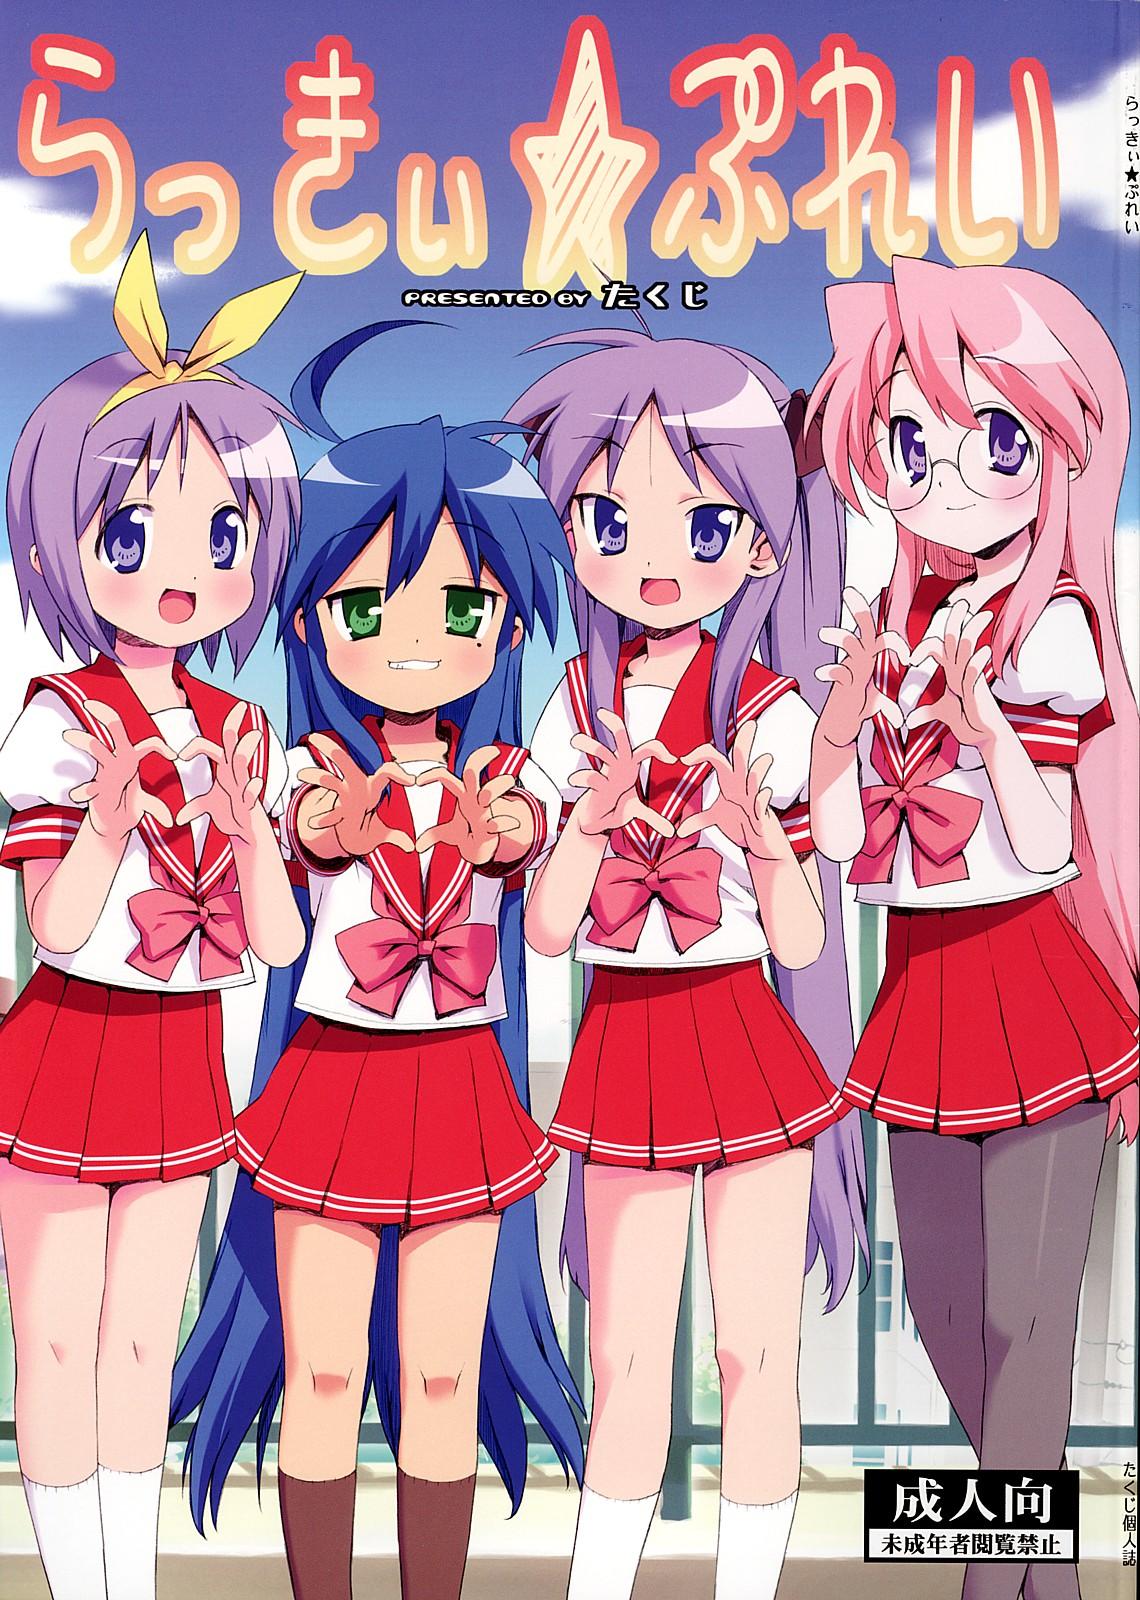 Club Lucky Play - Lucky star Gets - Picture 1